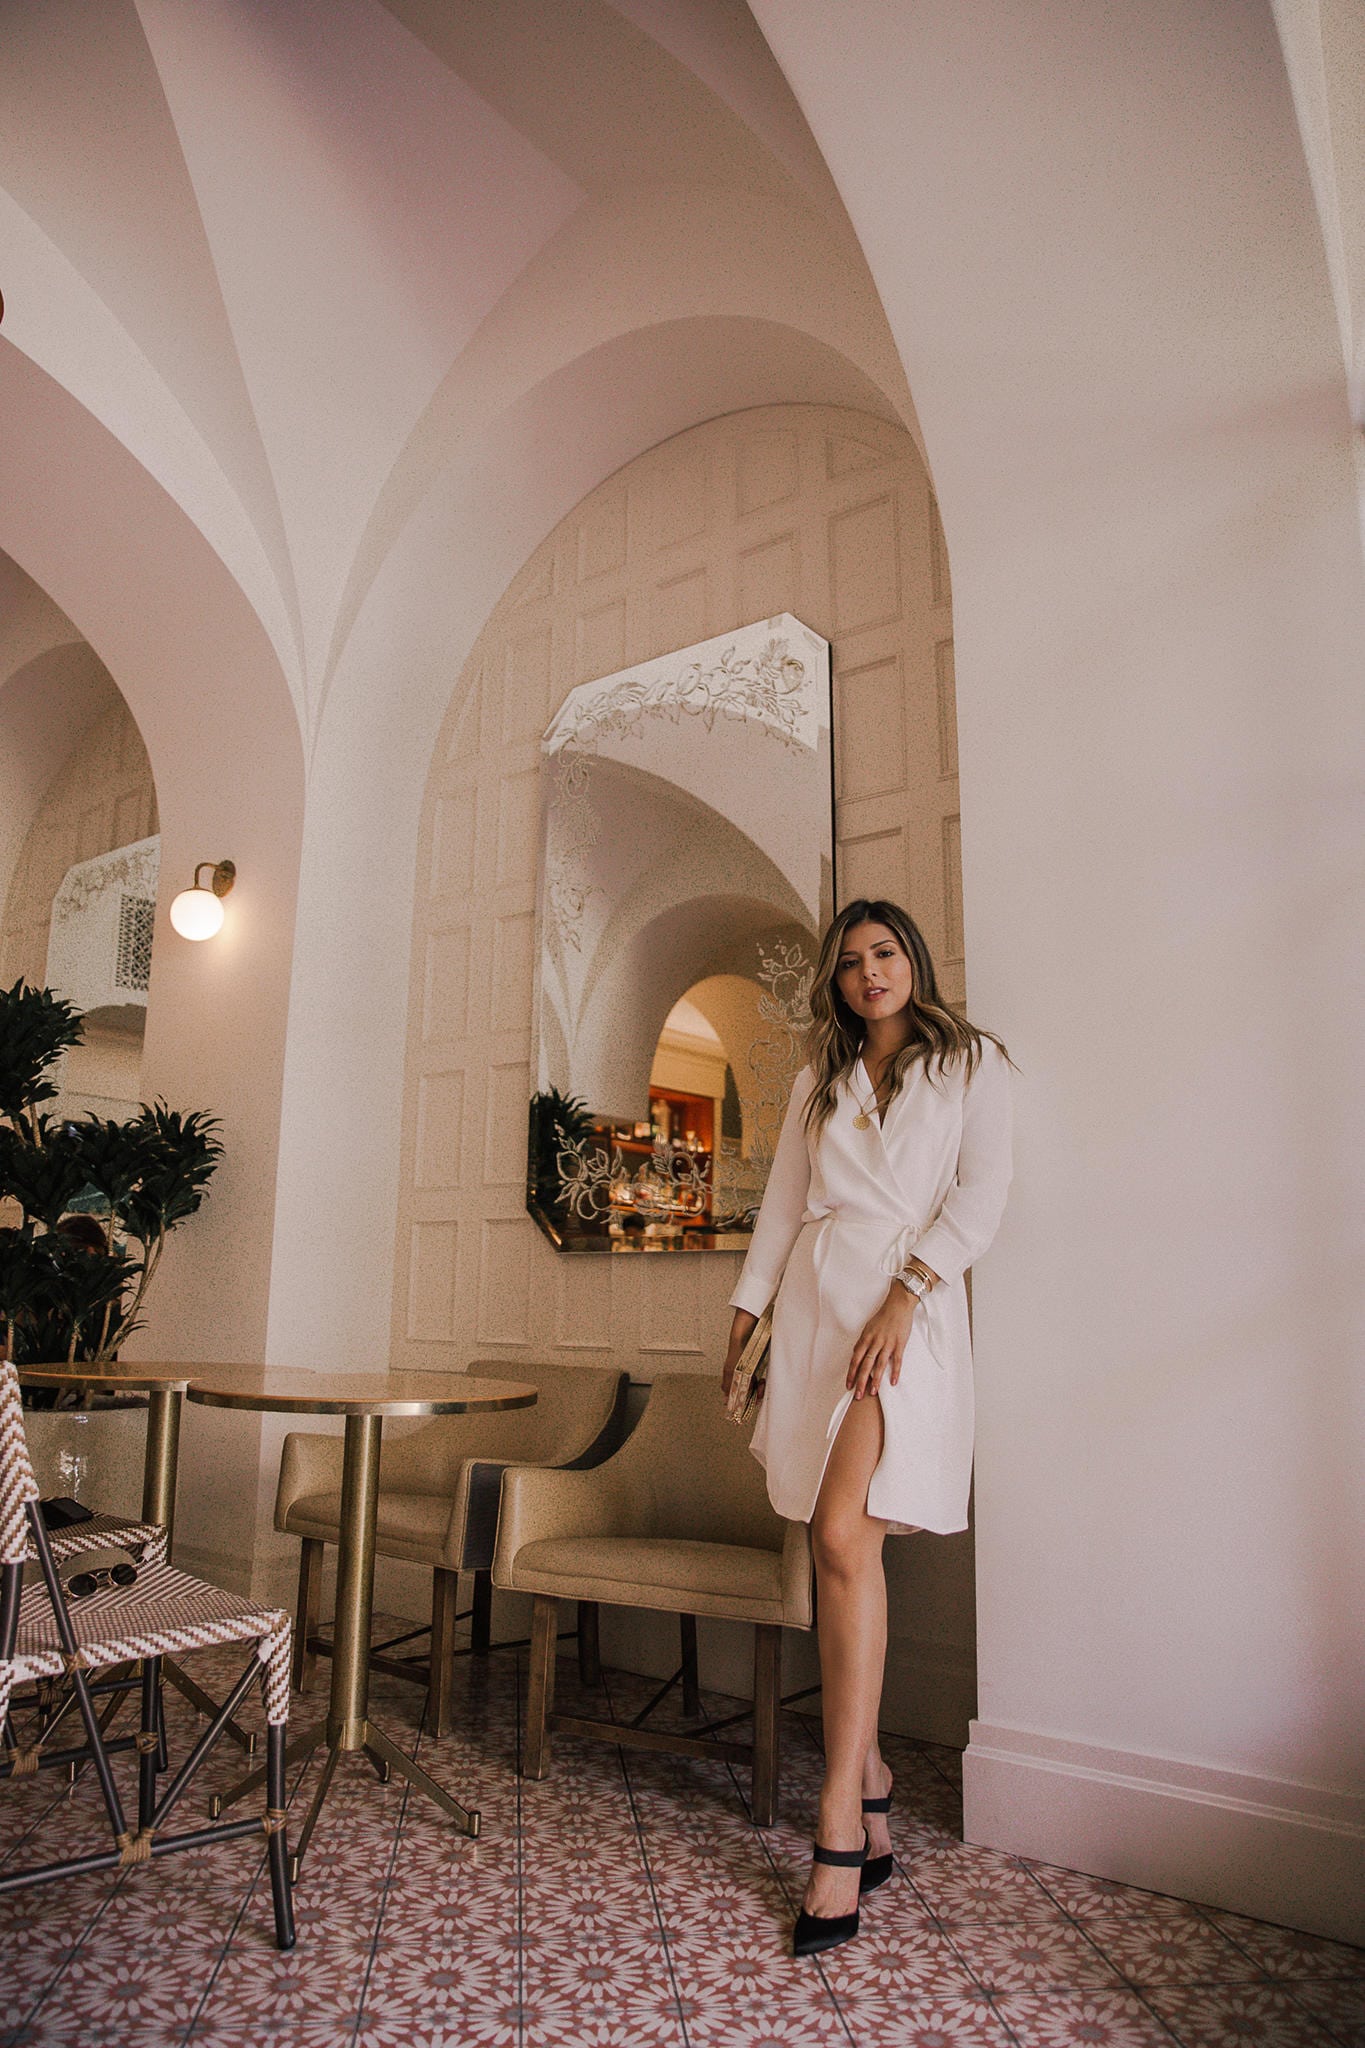 The Summer Shoes I'm Obsessed With Right Now by Pam Hetlinger | TheGirlFromPanama.com | Pointed Toe Mules, Stuart Weitzman Mules, Summer 2018 shoes, white dress, summer dress, summer style, la fashion blogger